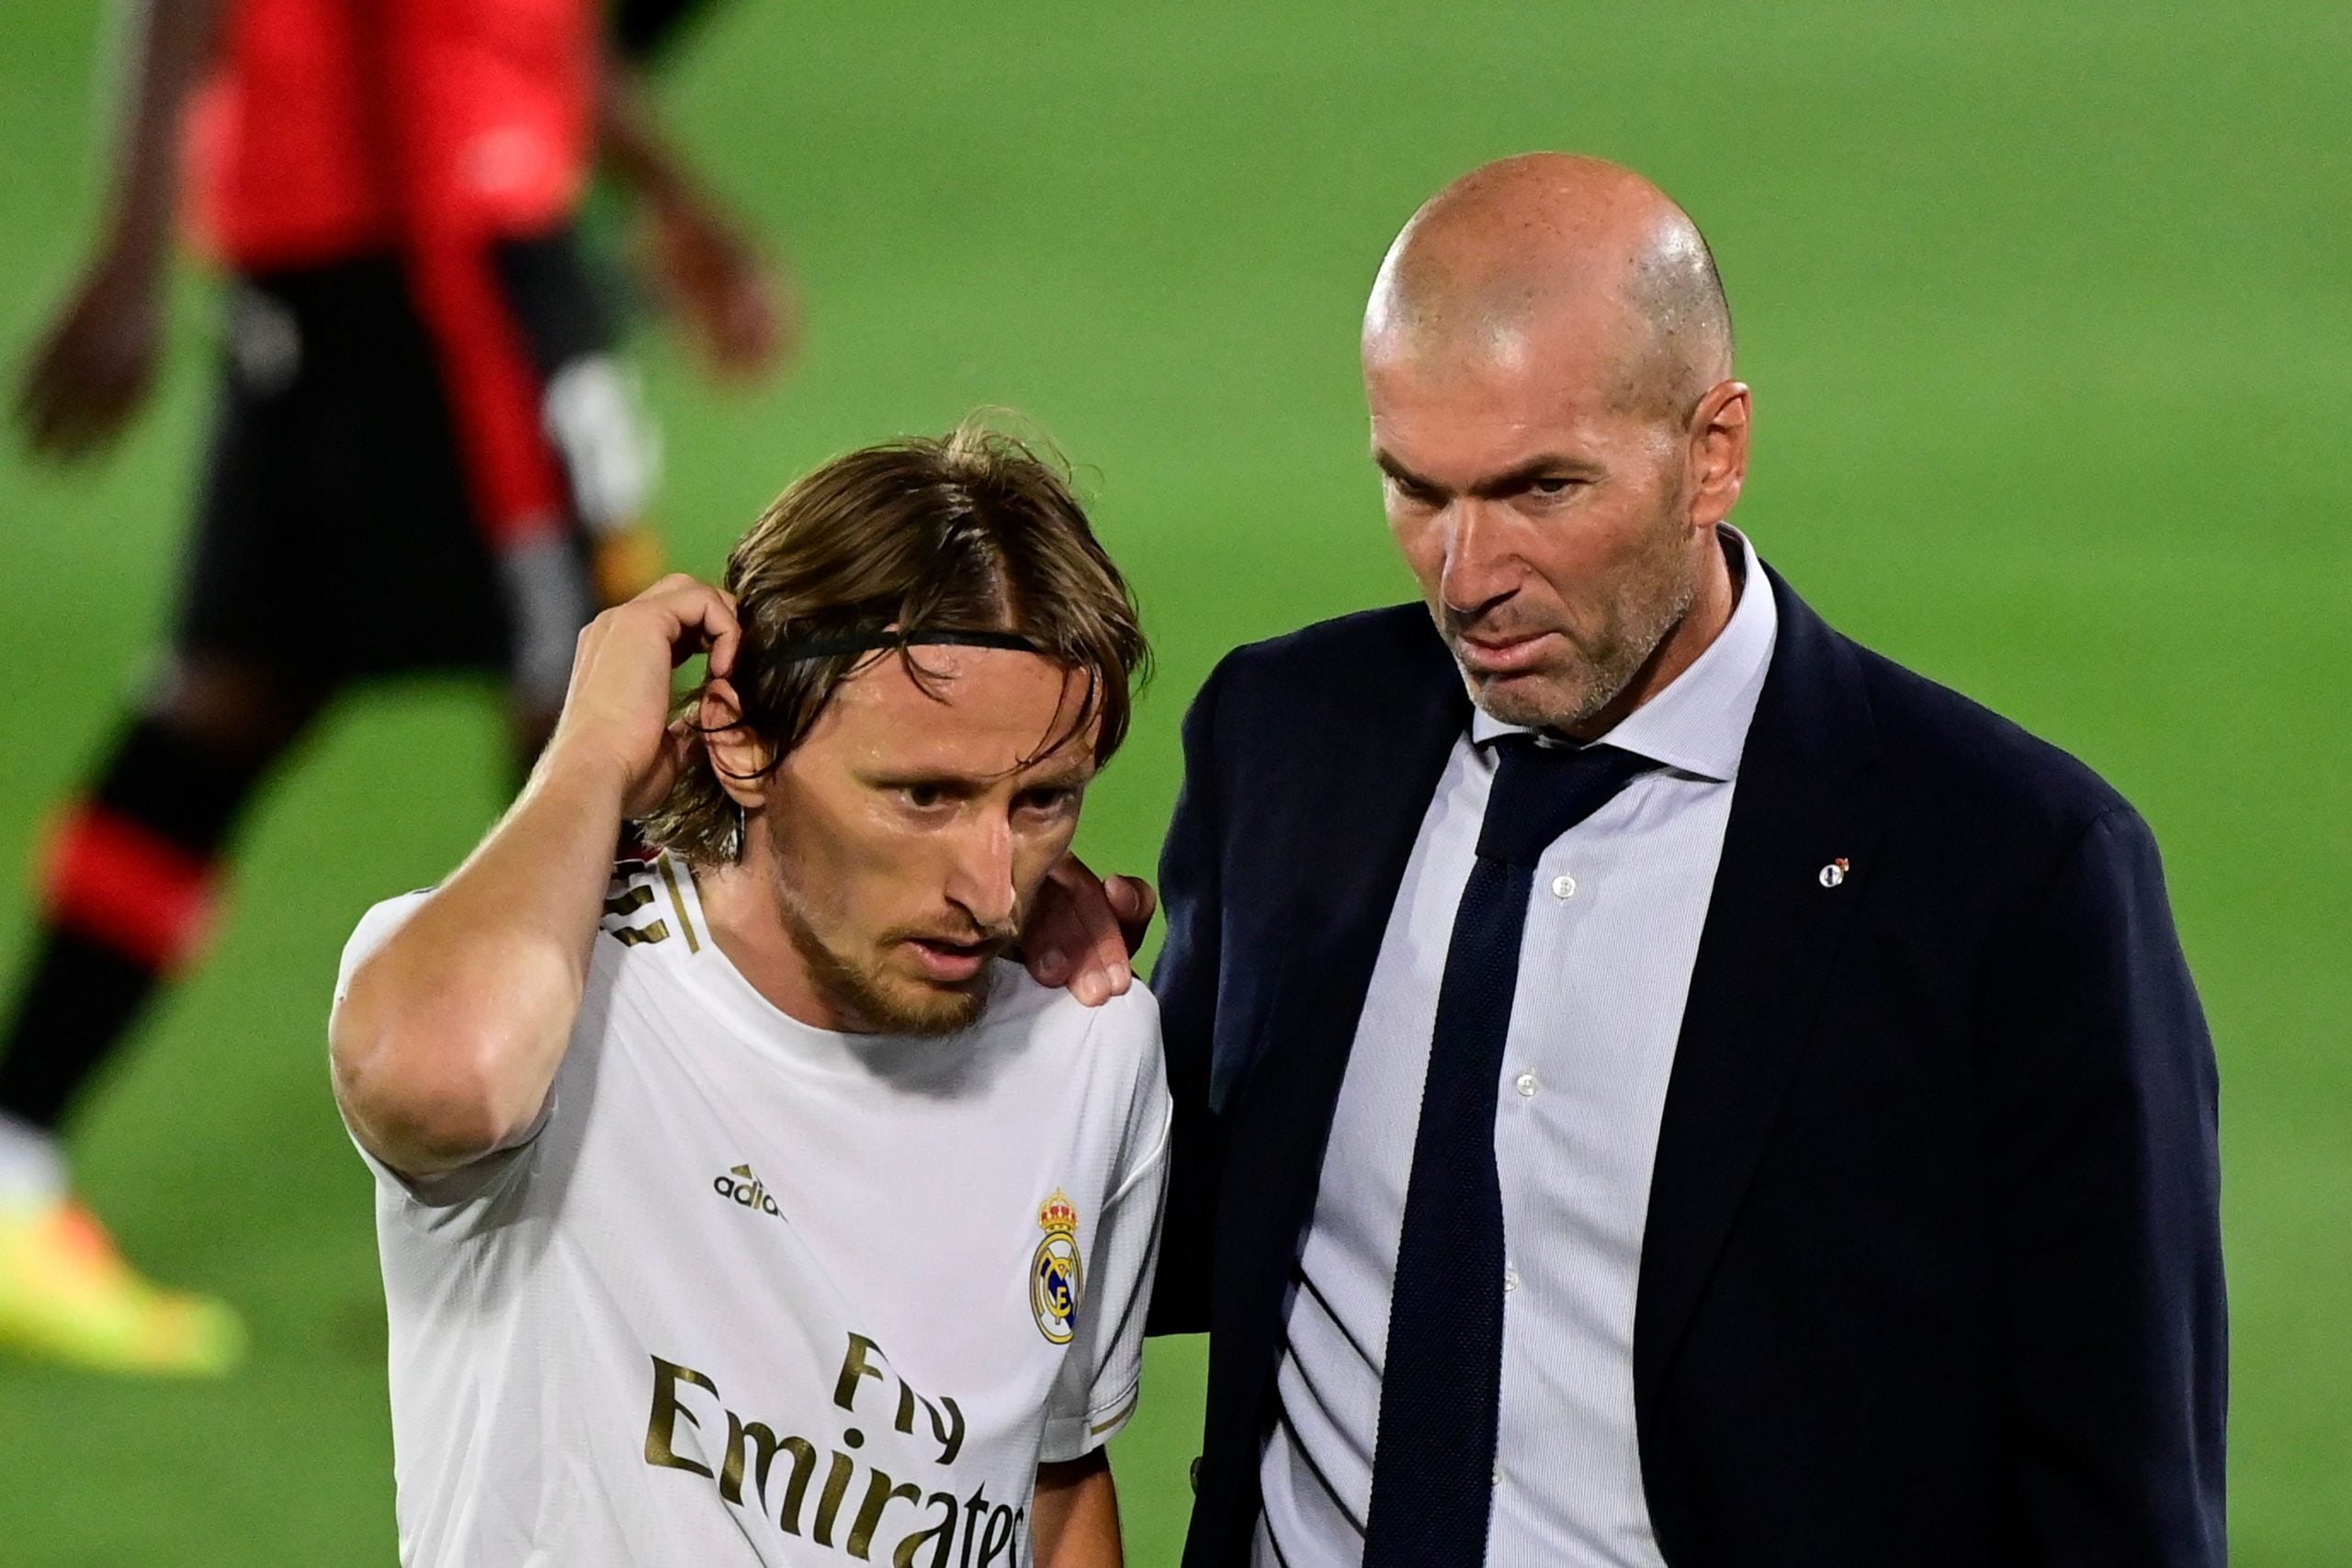 Real Madrid's French coach Zinedine Zidane talks to Real Madrid's Croatian midfielder Luka Modric during the Spanish League football match Real Madrid CF against RCD Mallorca at at the Alfredo di Stefano stadium in Valdebebas, on the outskirts of Madrid, on June 24, 2020. (Photo by JAVIER SORIANO/AFP via Getty Images)